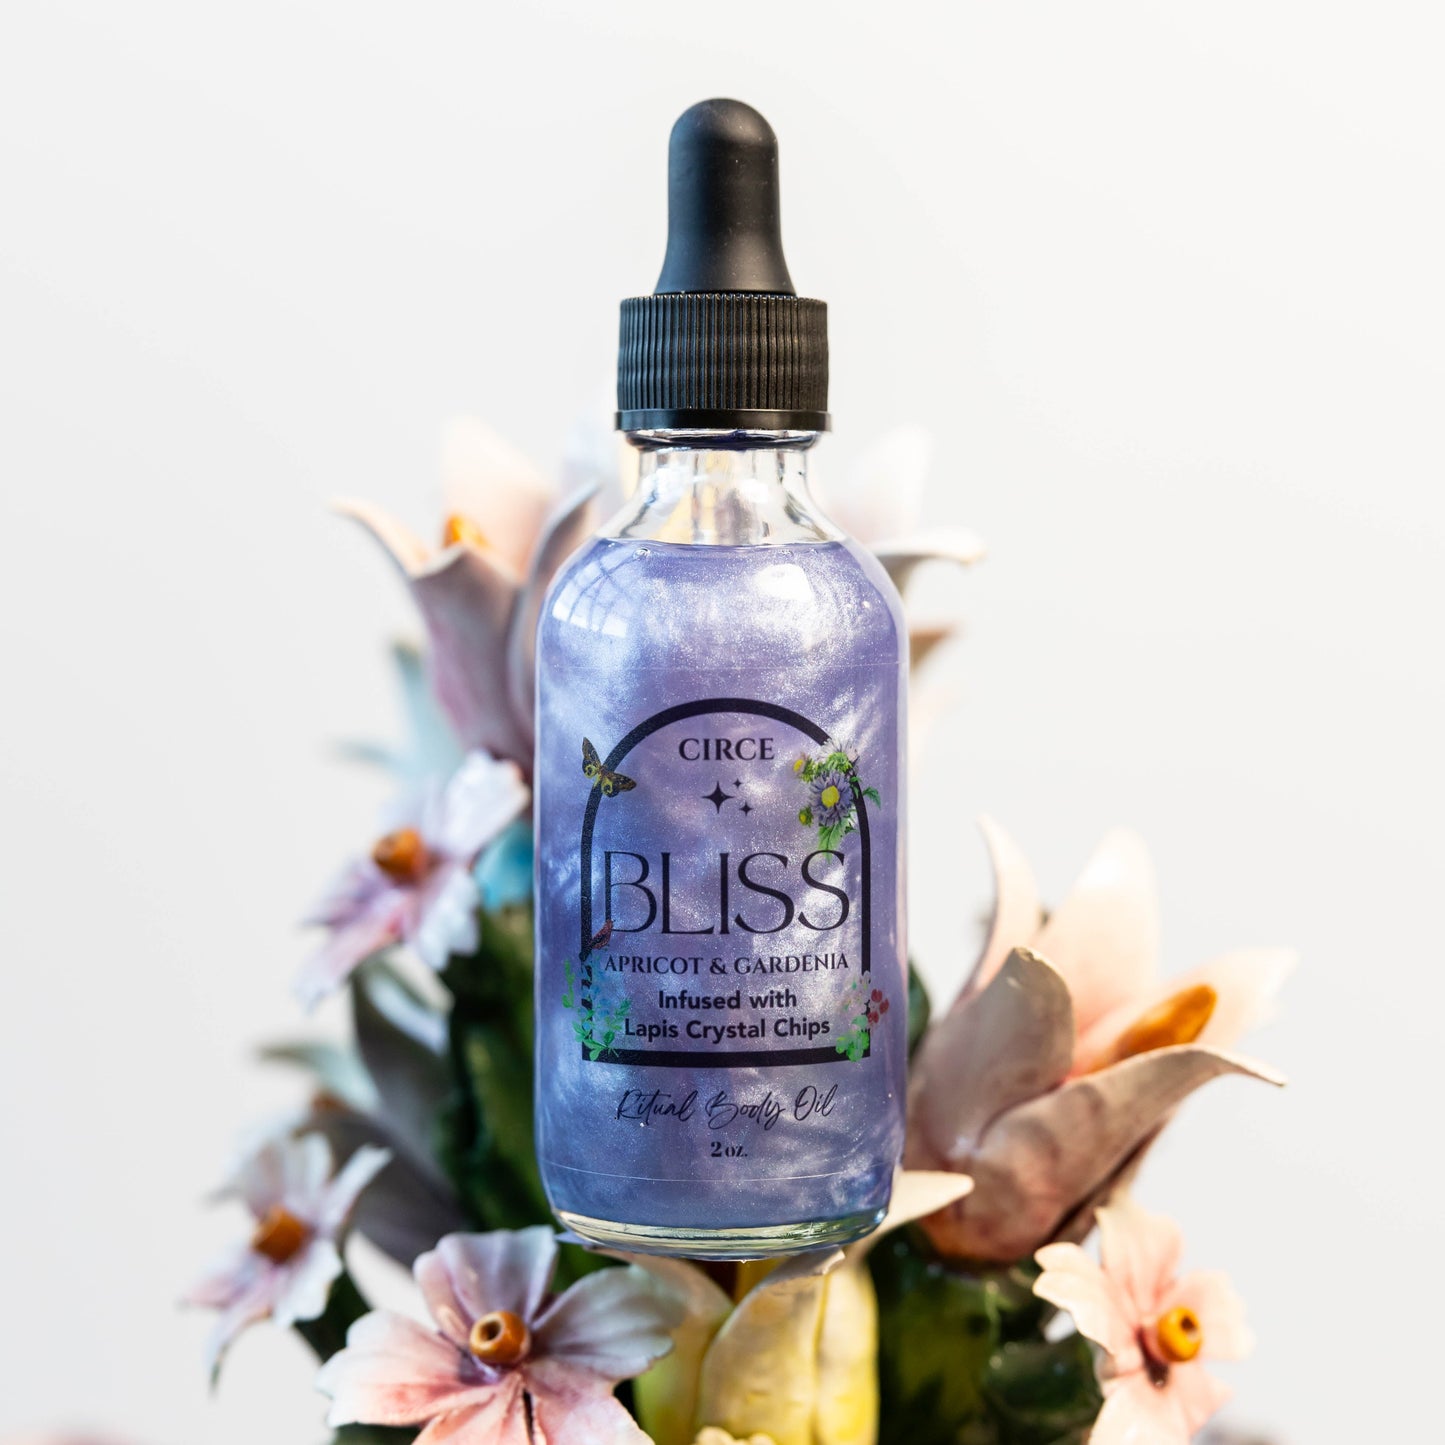 Bliss Ritual Body Oil 2 oz.  from Circe Boutique